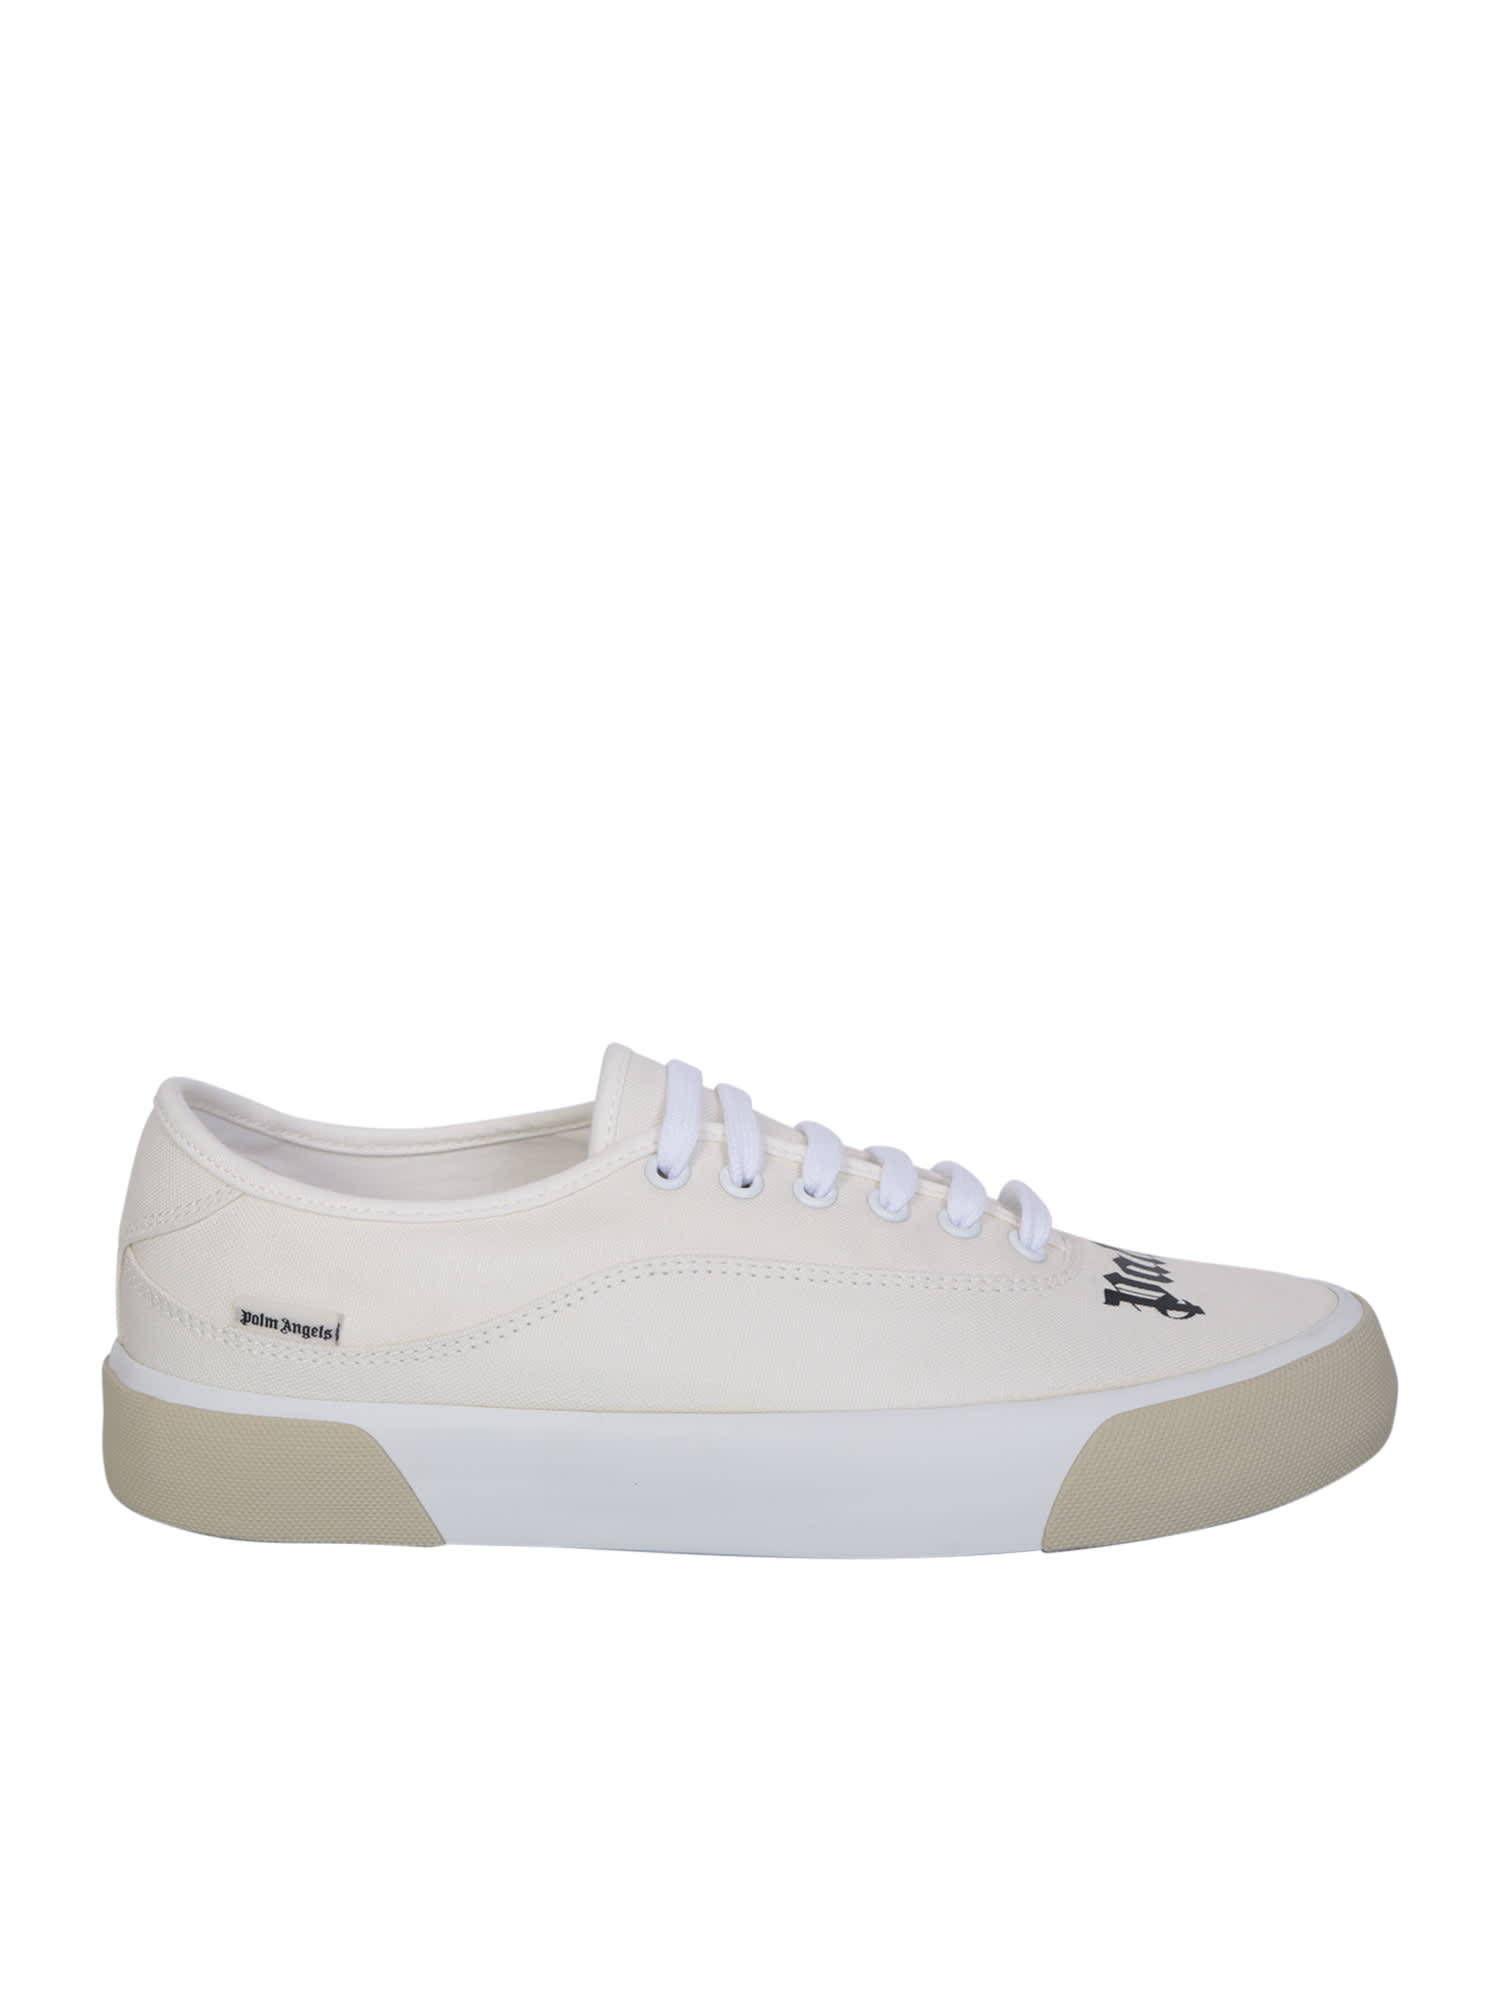 Palm Angels Skater Low Sneakers